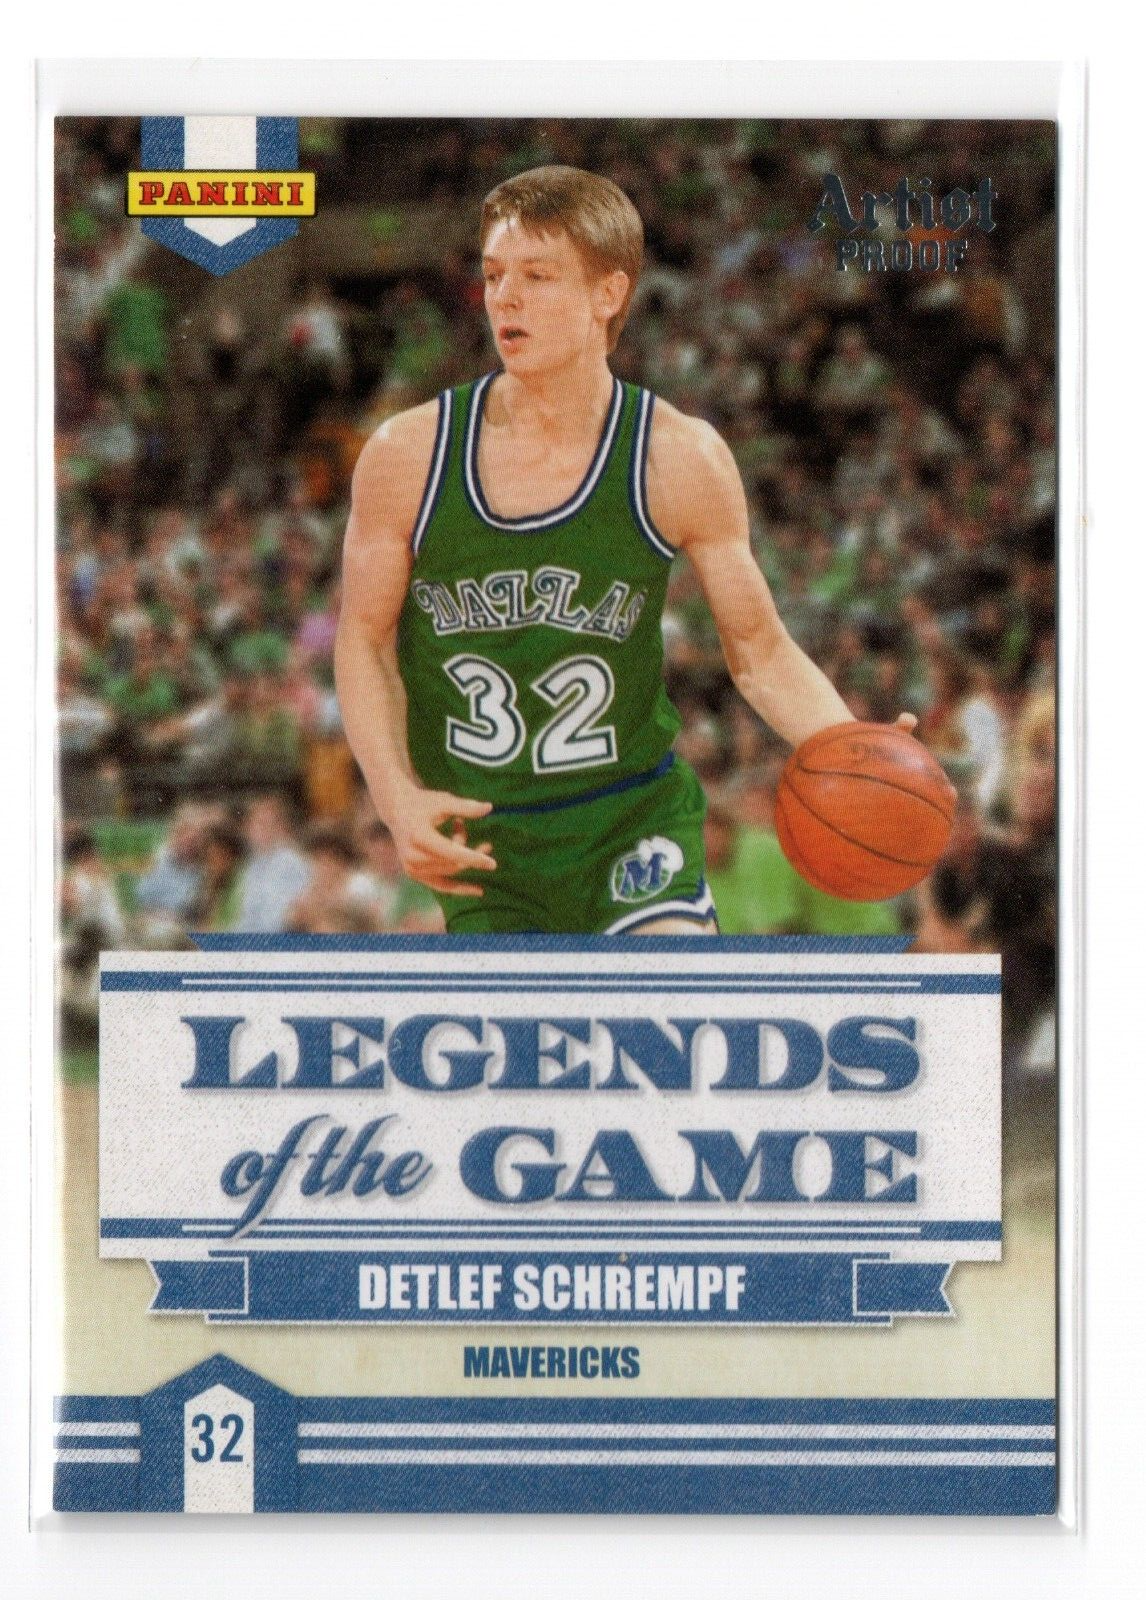 Primary image for 2009-10 Panini Legends of the Game Artist Proof /199 Detlef Schrempf #6 NM-MT